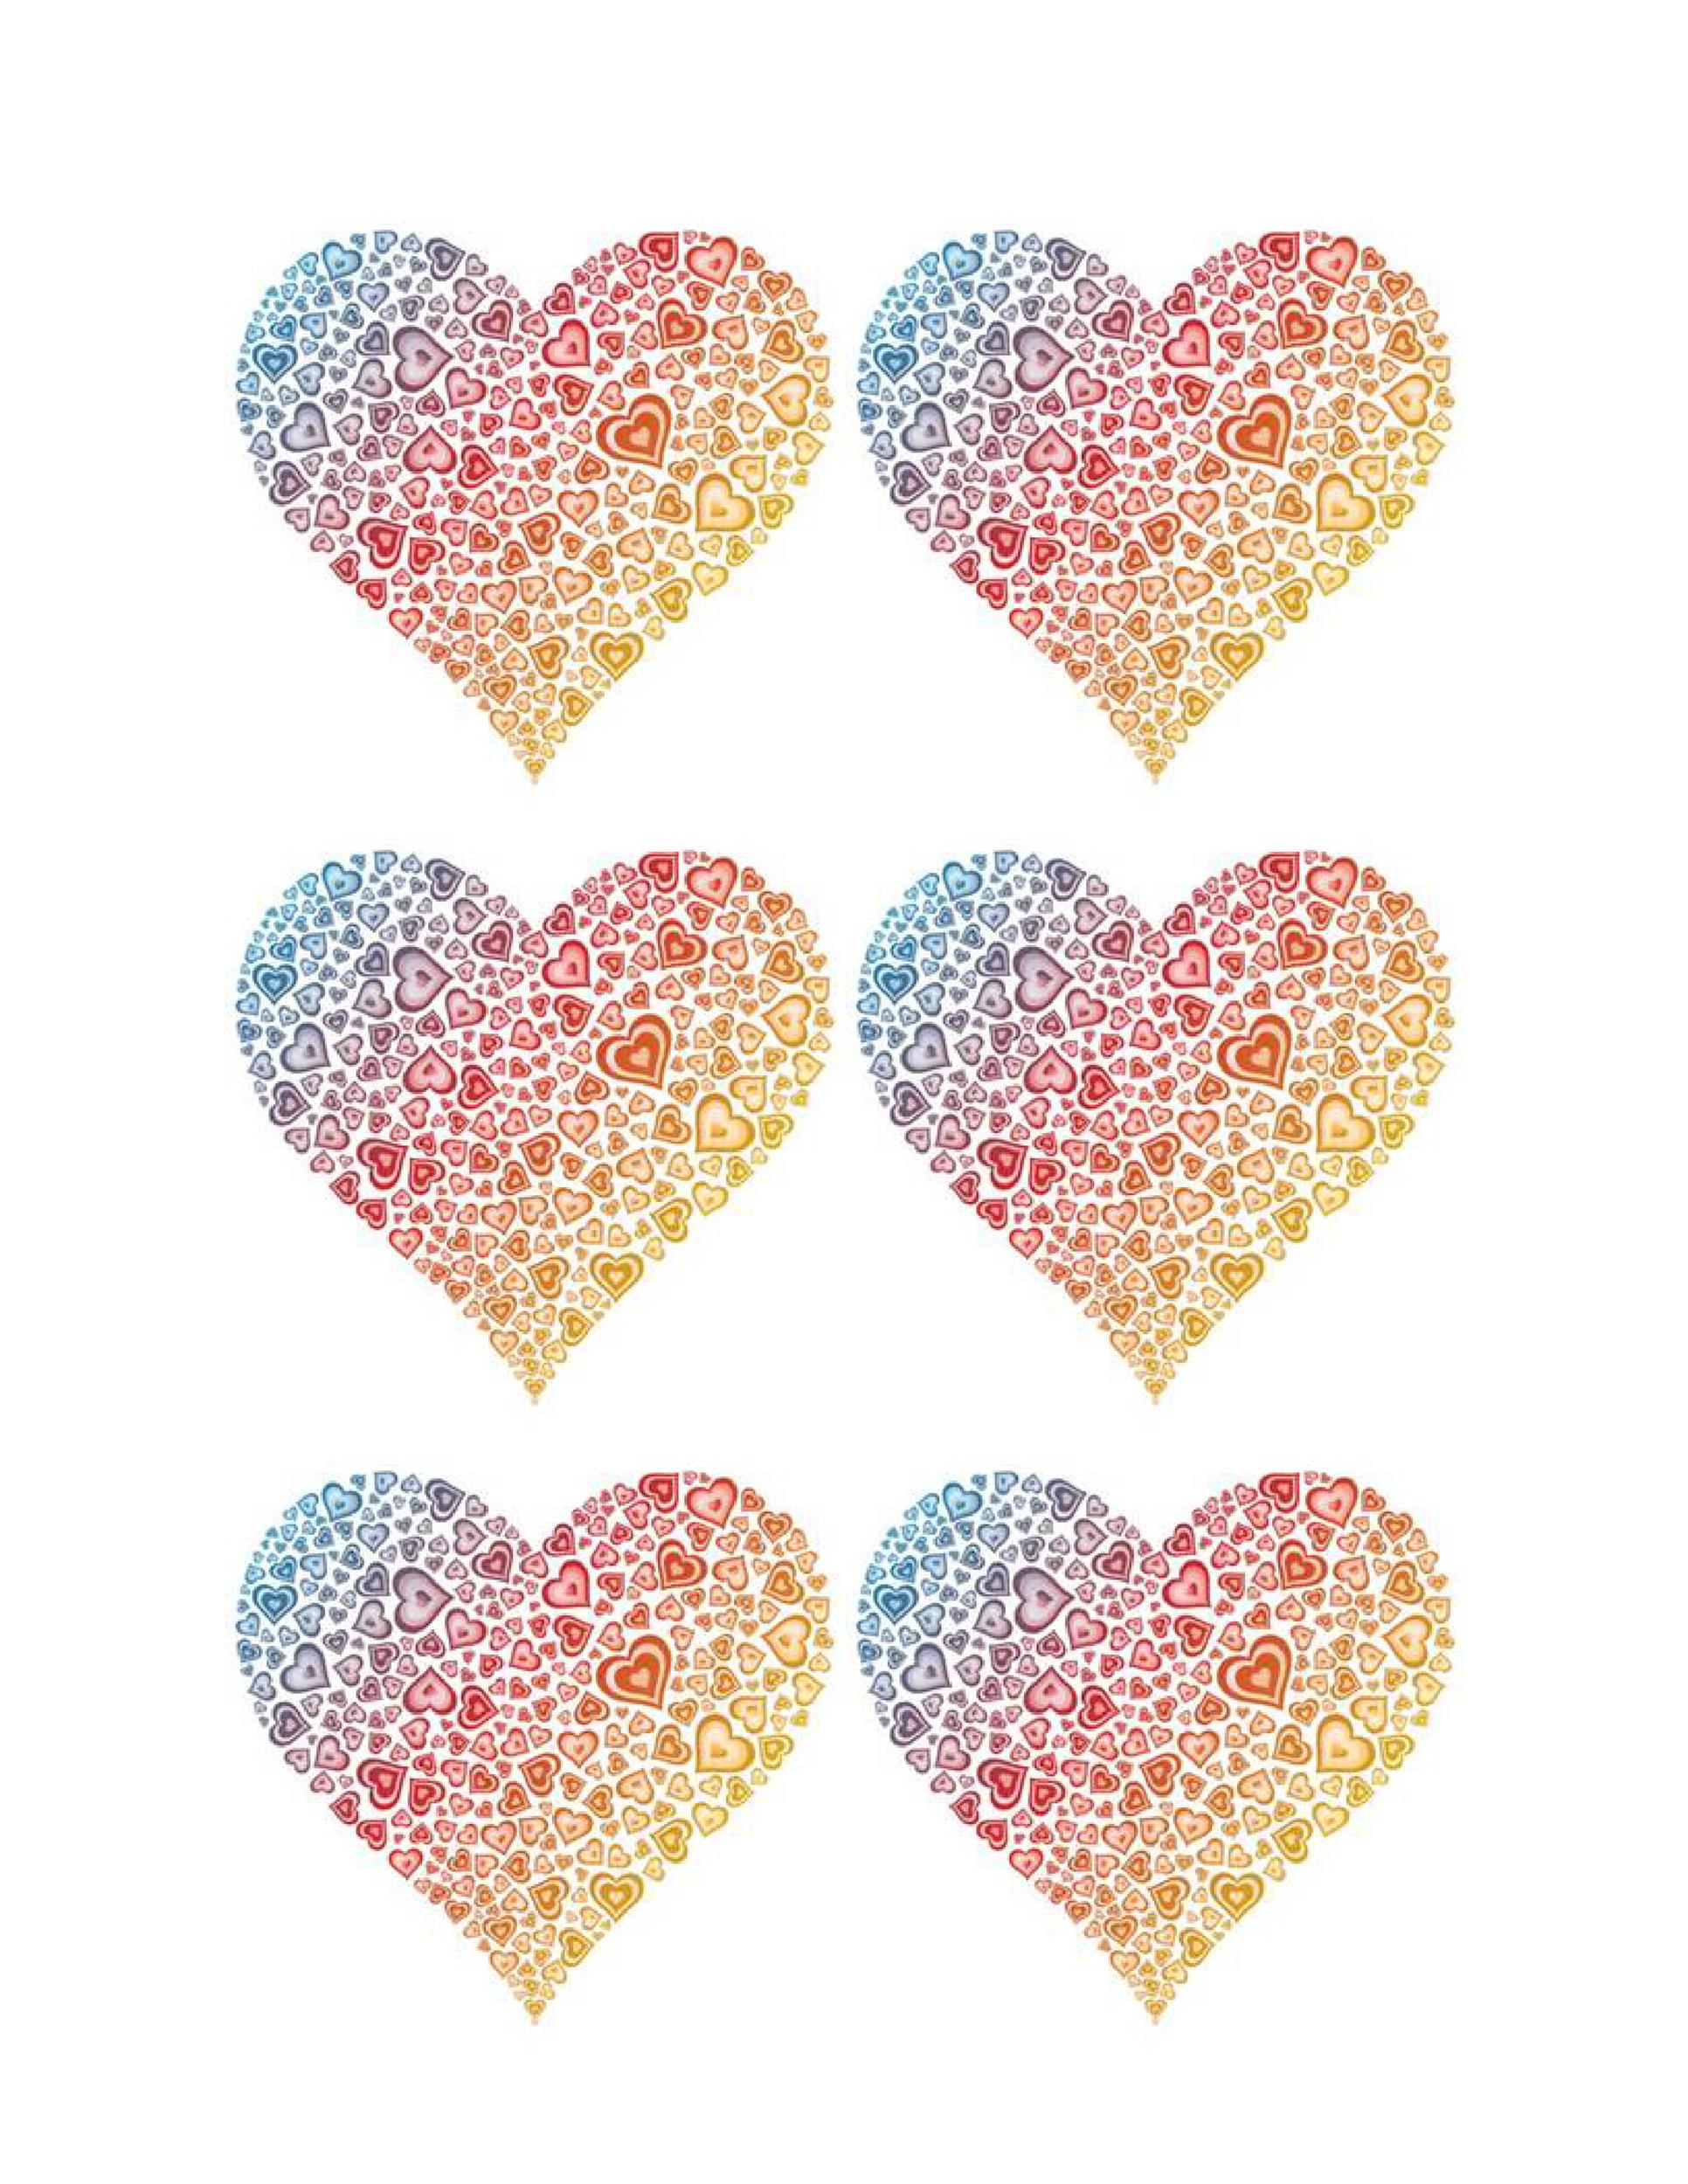 printable-hearts-colored